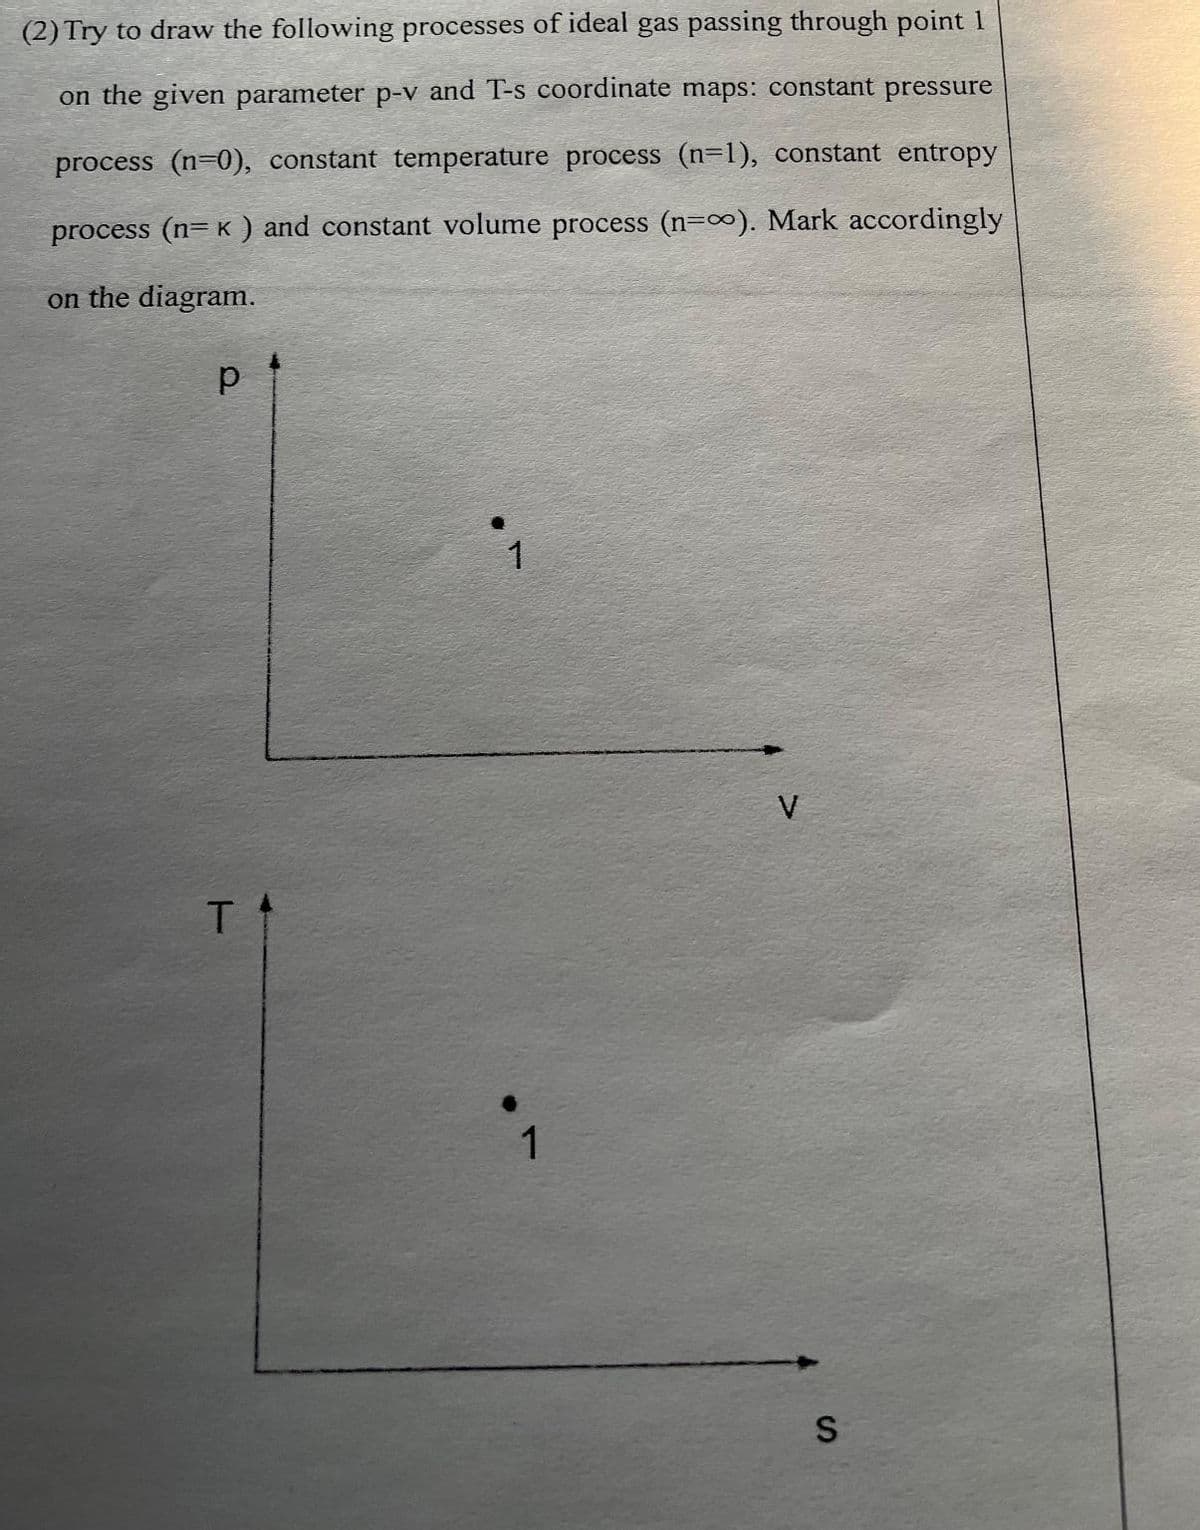 (2) Try to draw the following processes of ideal gas passing through point 1
on the given parameter p-v and T-s coordinate maps: constant pressure
process (n=0), constant temperature process (n=1), constant entropy
process (n=K) and constant volume process (n=∞). Mark accordingly
on the diagram.
Р
T +
1
V
S